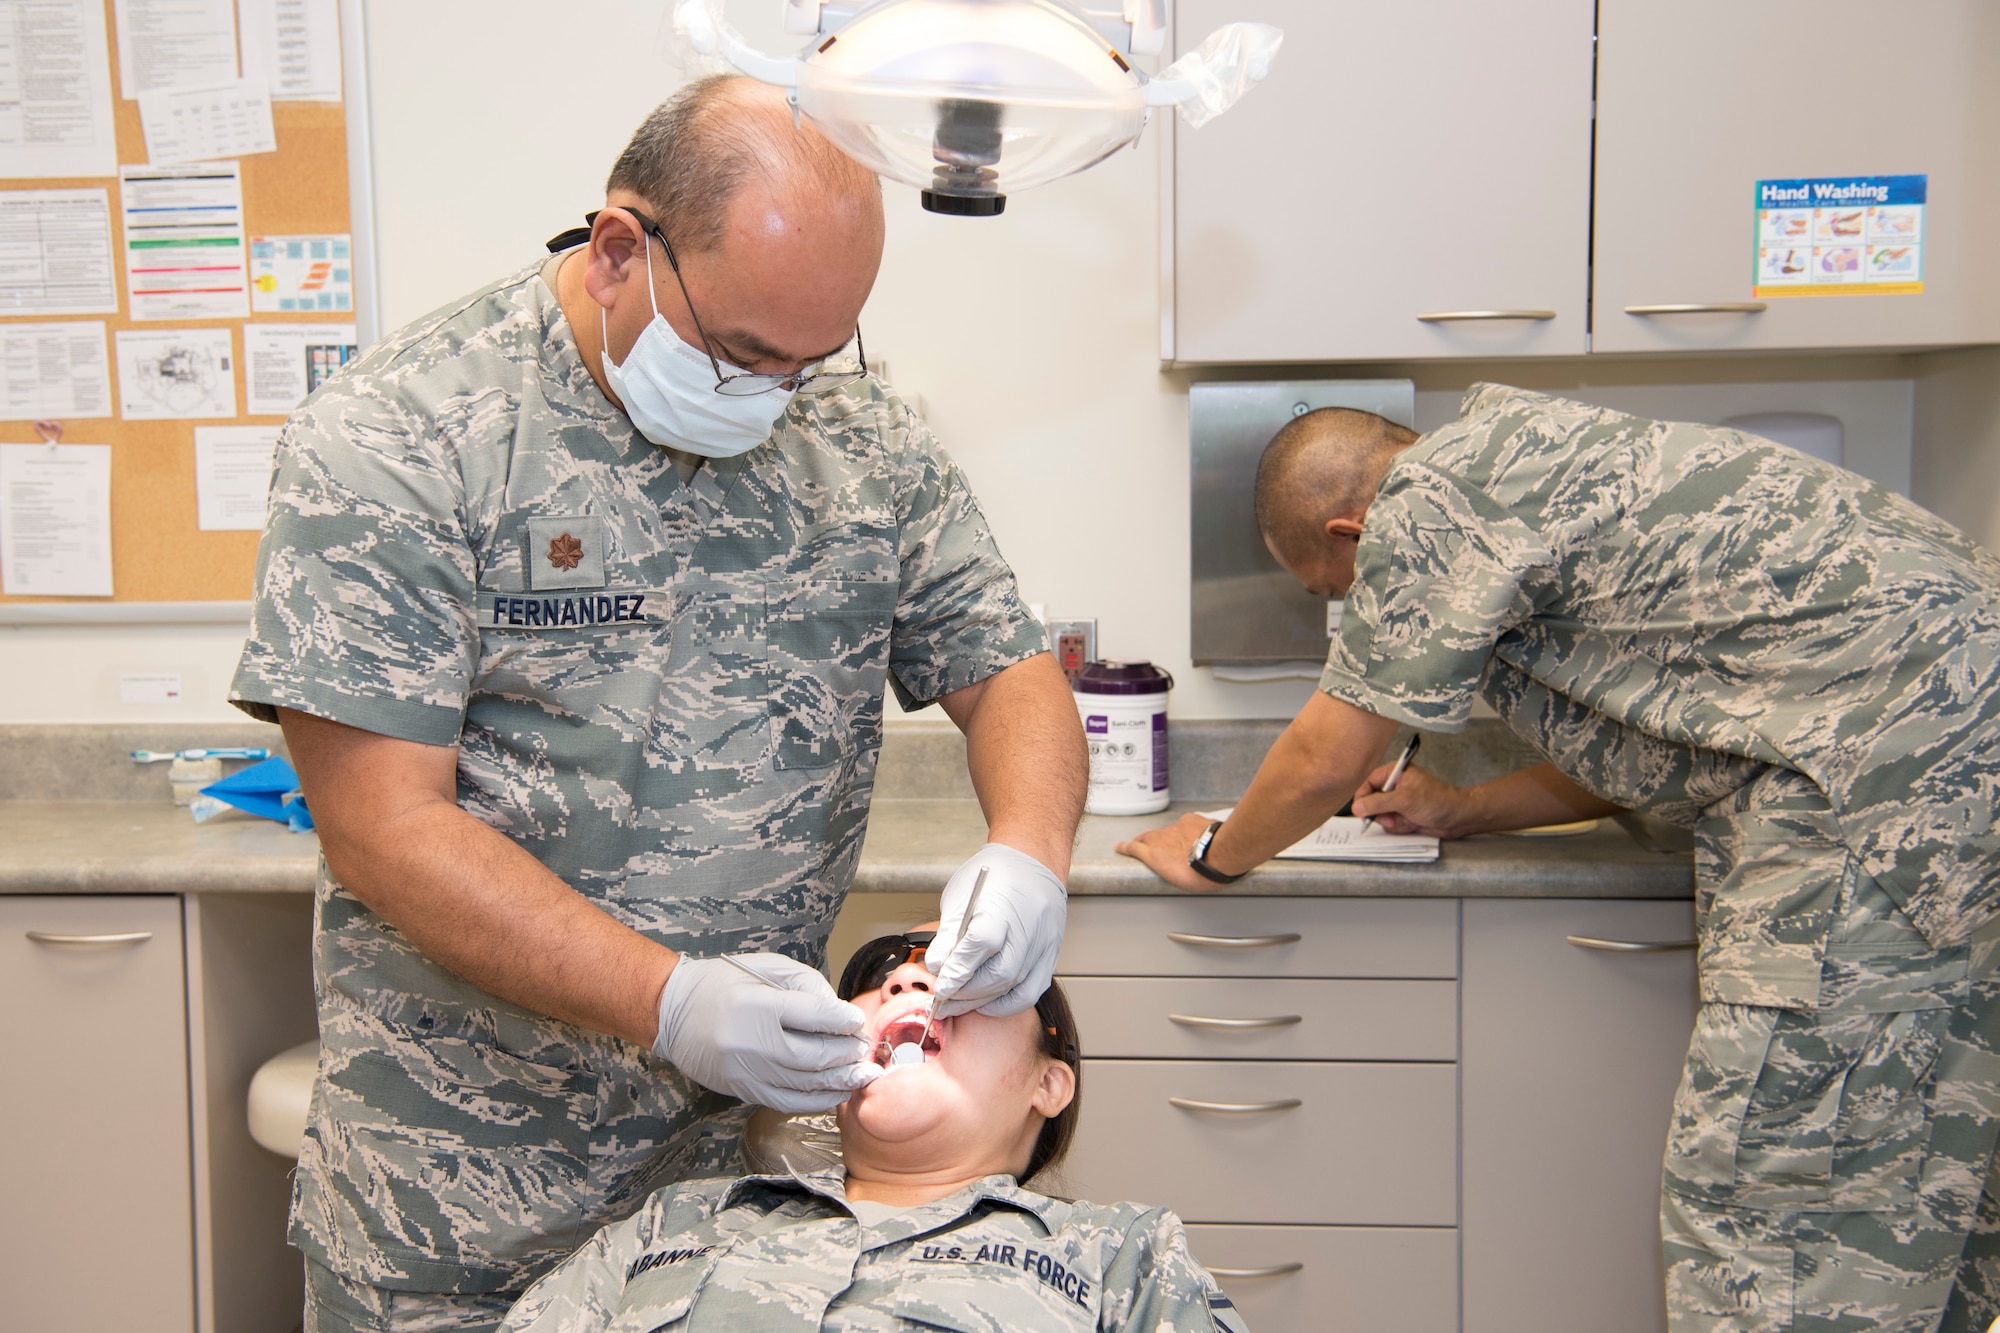 U.S. Air Force Maj. Michael Fernandez, Air Force Reserve’s 624th Aerospace Medicine Flight chief dentist, conducts a dental exam for Master Sgt. Jean Chabanne, Air National Guard’s 254th Air Base Group personalist, while Tech. Sgt. Vincent Nelson, 624th AMDF dental services non-commissioned officer in charge, scribes dental notes as part of individual medical readiness requirements during a unit training assembly at Andersen Air Force Base, Guam, June 3, 2018.